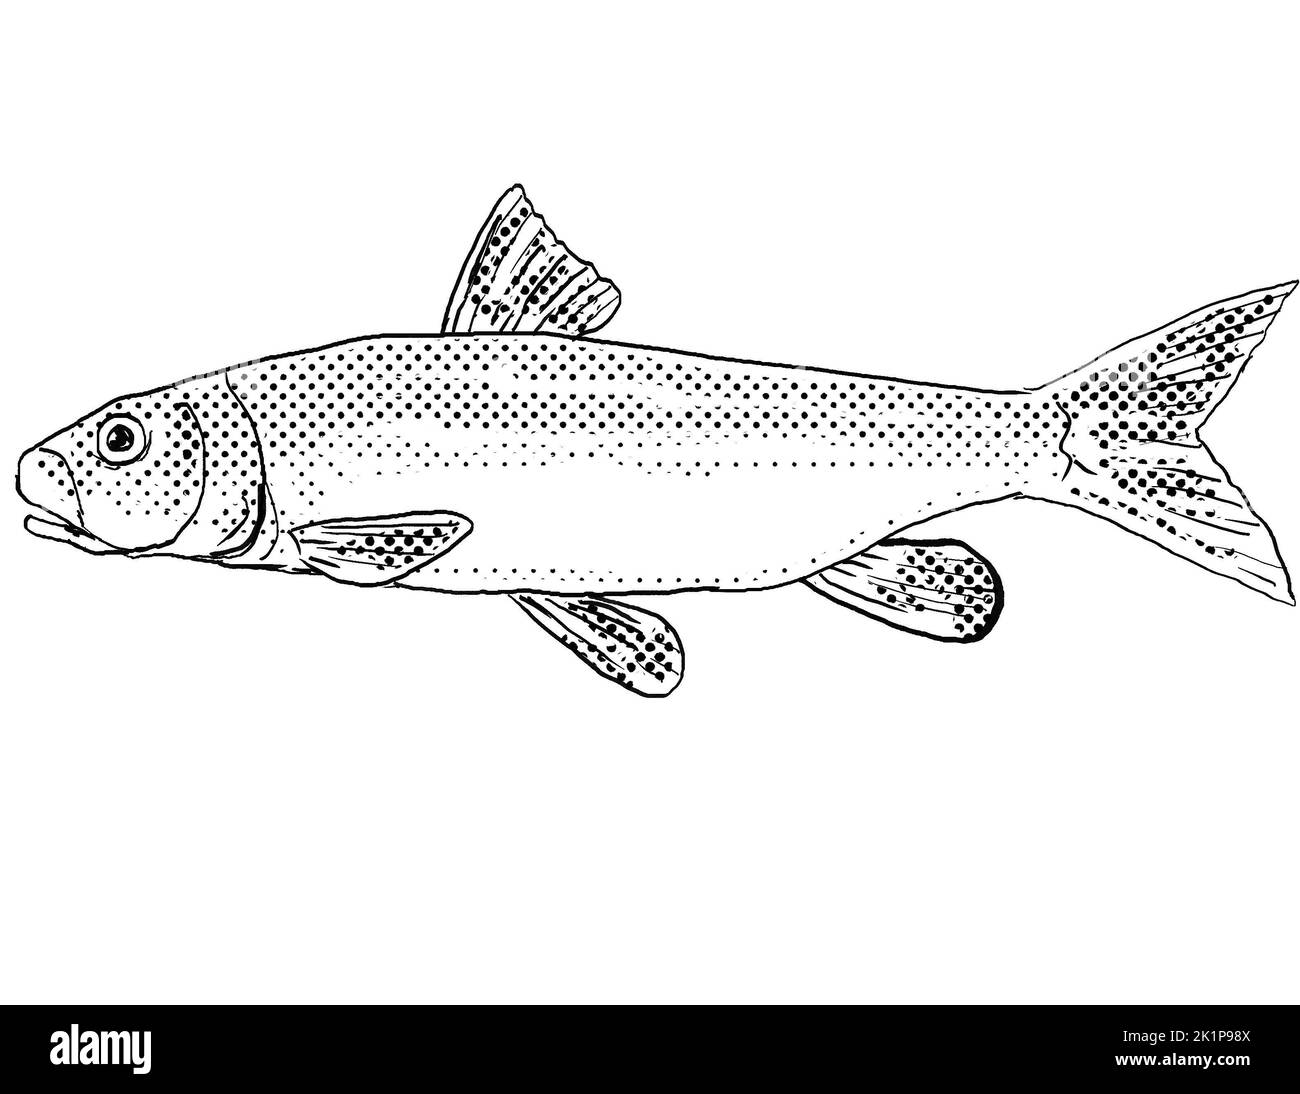 Cartoon style line drawing of a river redhorse or Moxostoma carinatum a freshwater fish endemic to North America with halftone dots shading on isolate Stock Photo